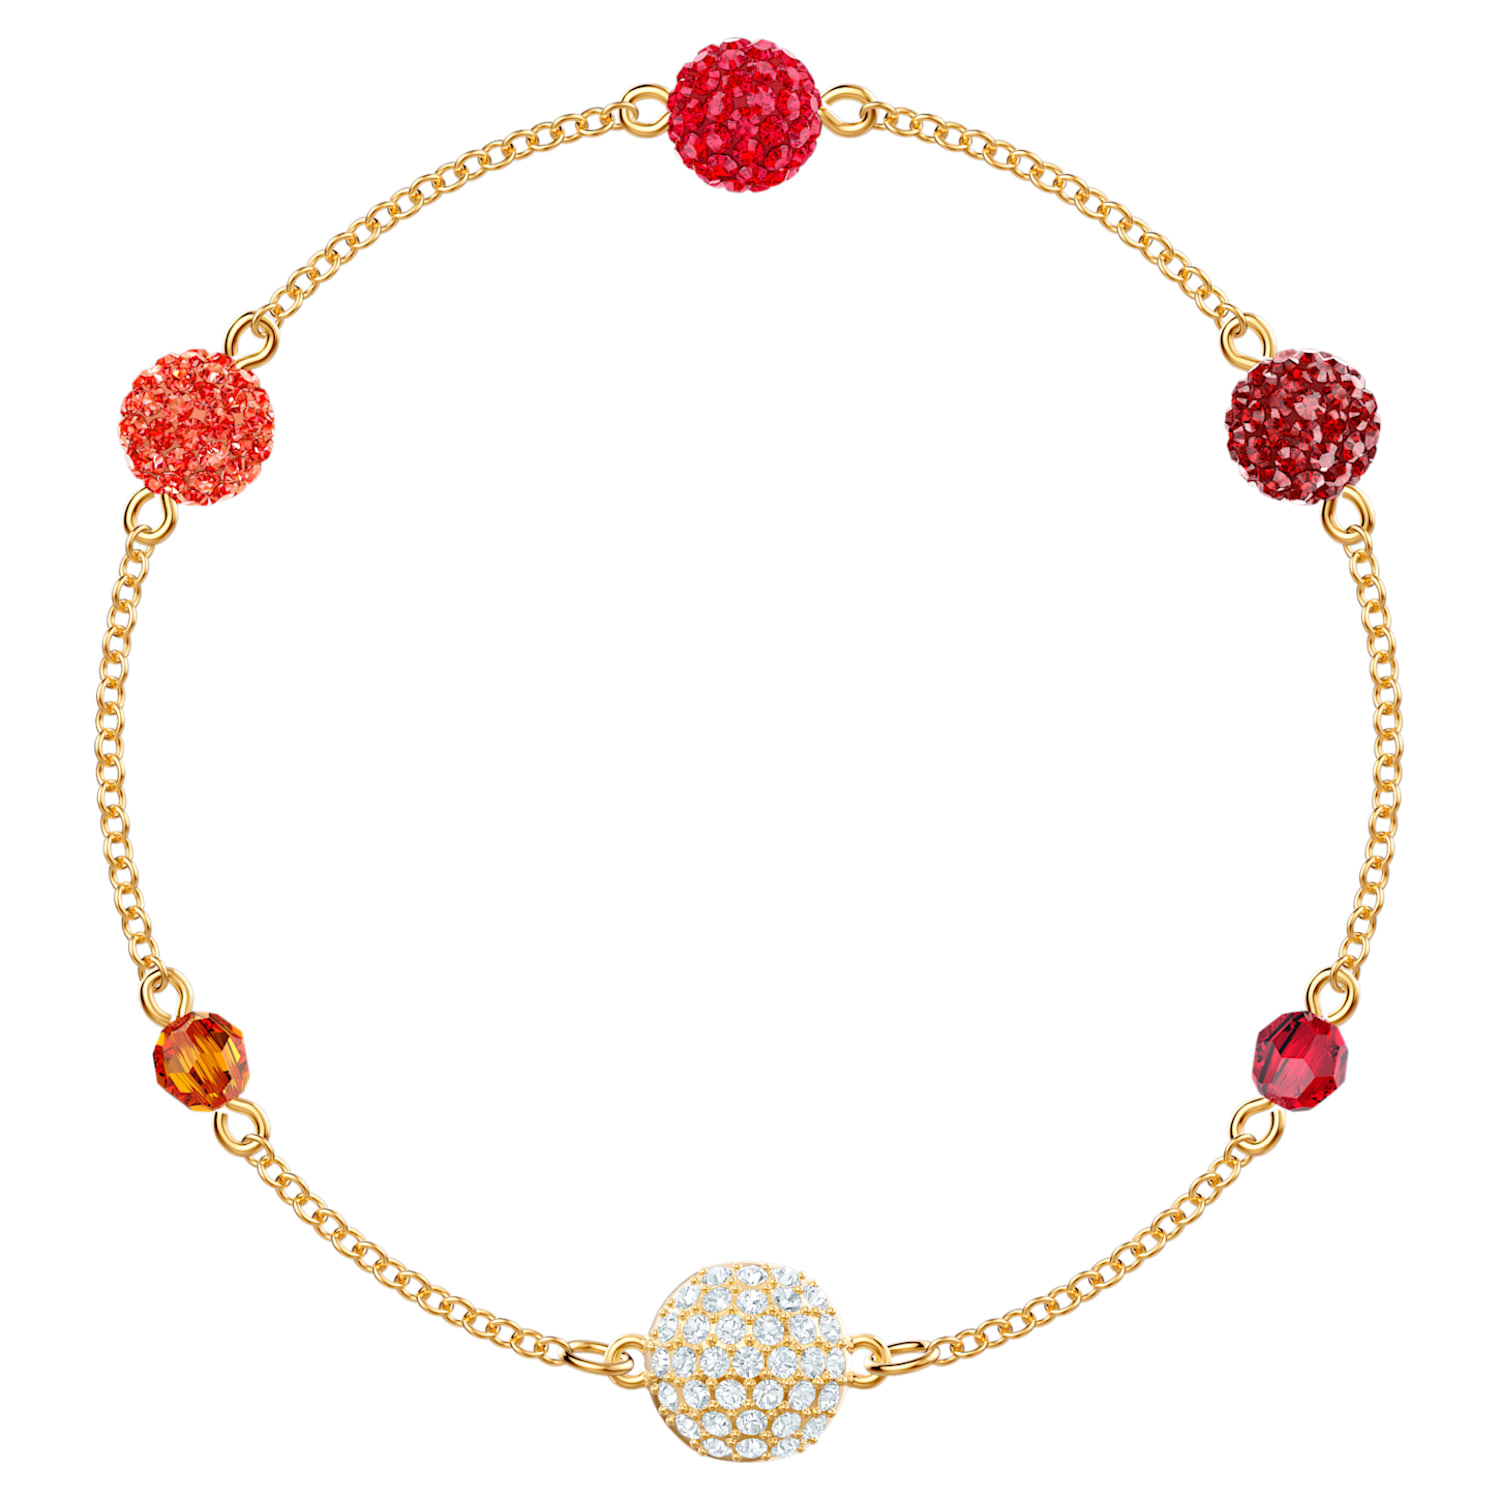 Swarovski Remix Collection strand, Magnetic closure, Red, Gold 